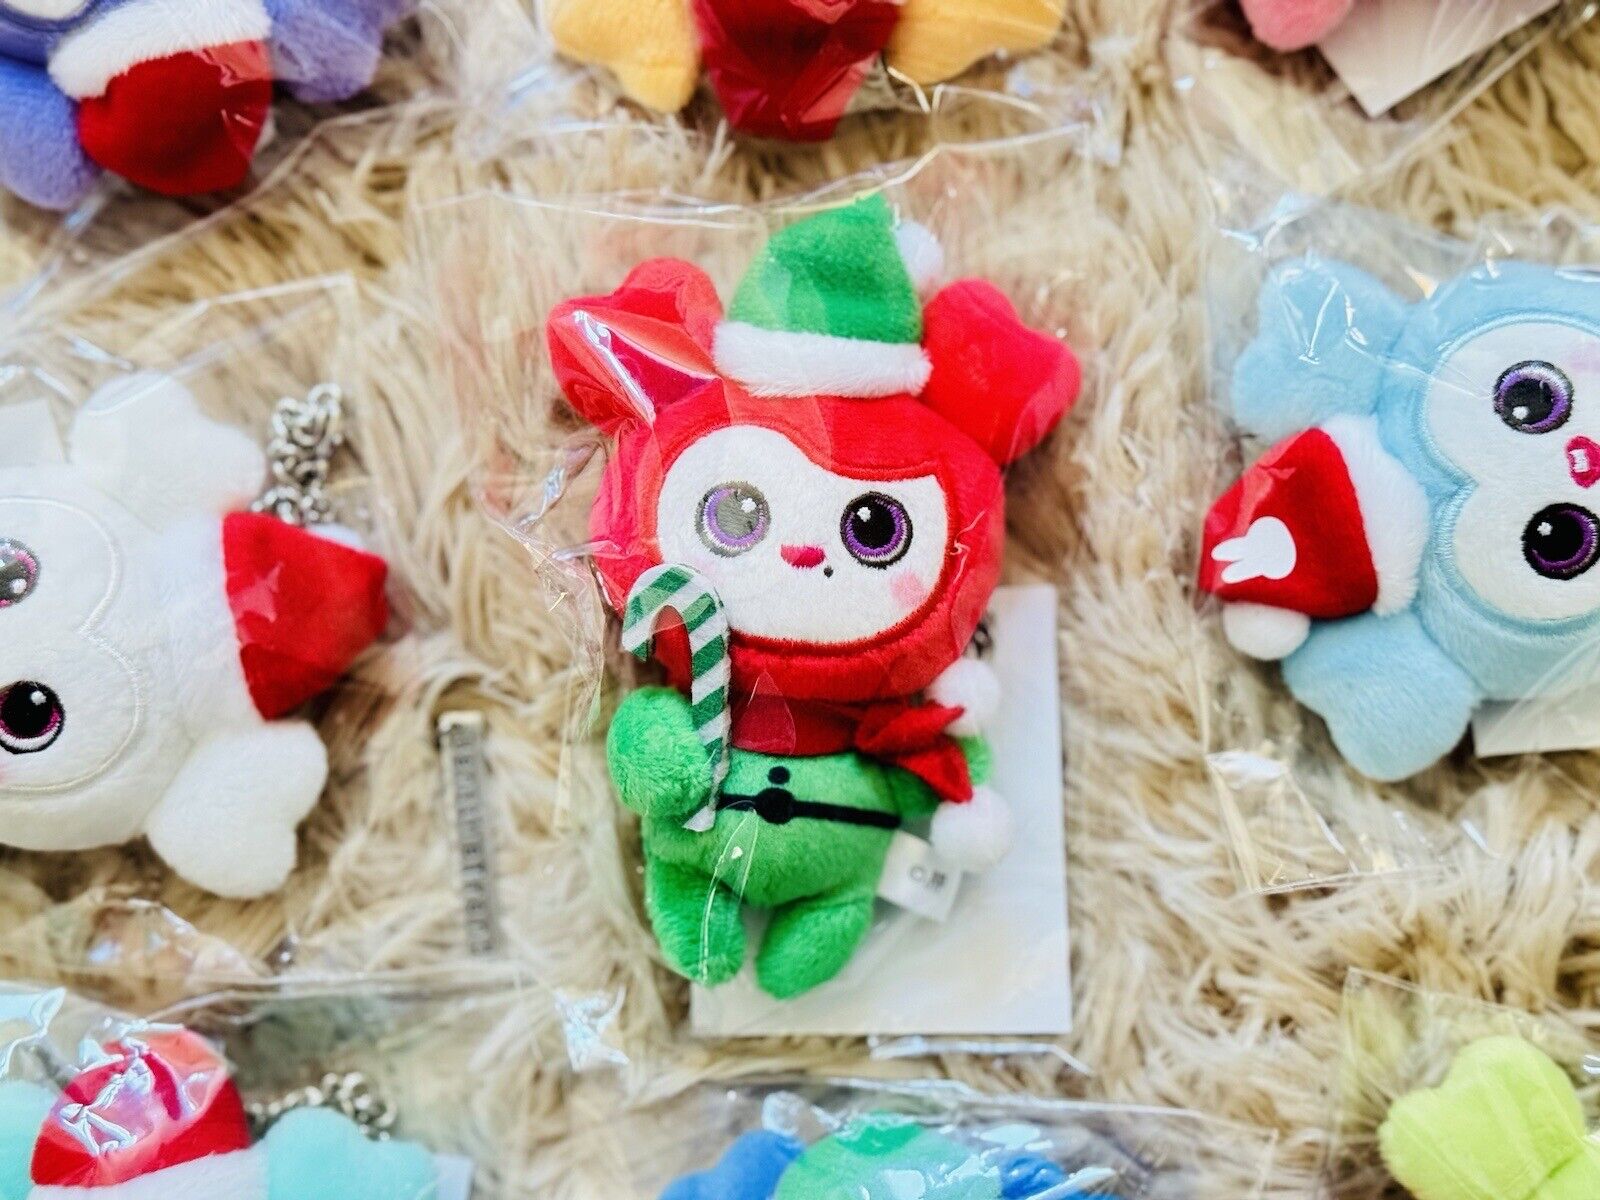 TWICE ‘TOWER RECORDS’ Christmas - Chaeyoung Chaengvely Lovely Bag Charm/Keychain